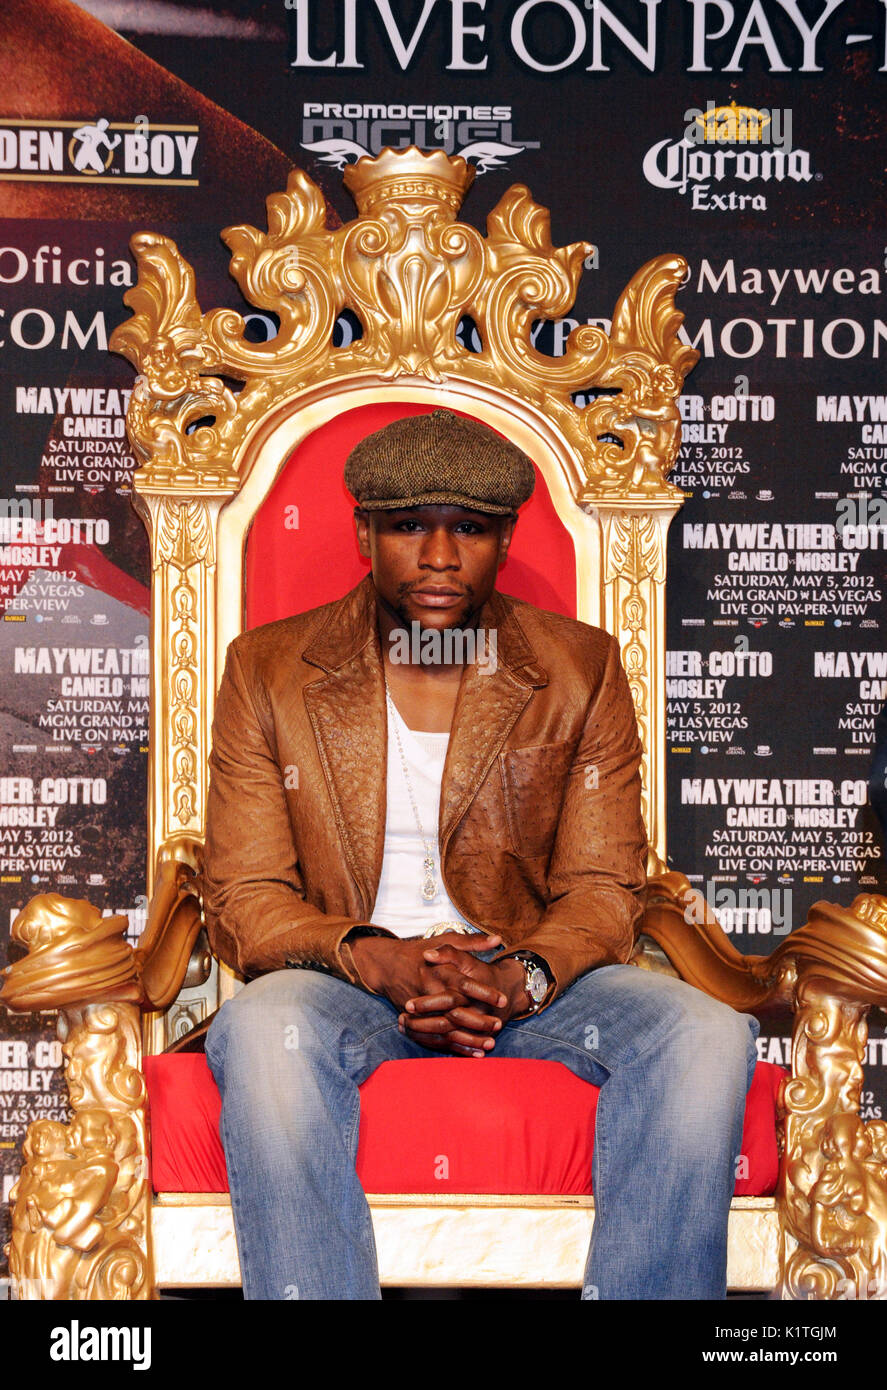 Boxer Floyd Mayweather attends press conference Grauman's Chinese Theatre Hollywood March 1,2012. Mayweather Cotto will meet WBA Super Welterweight World Championship fight May 5 MGM Grand Las Vegas. Stock Photo